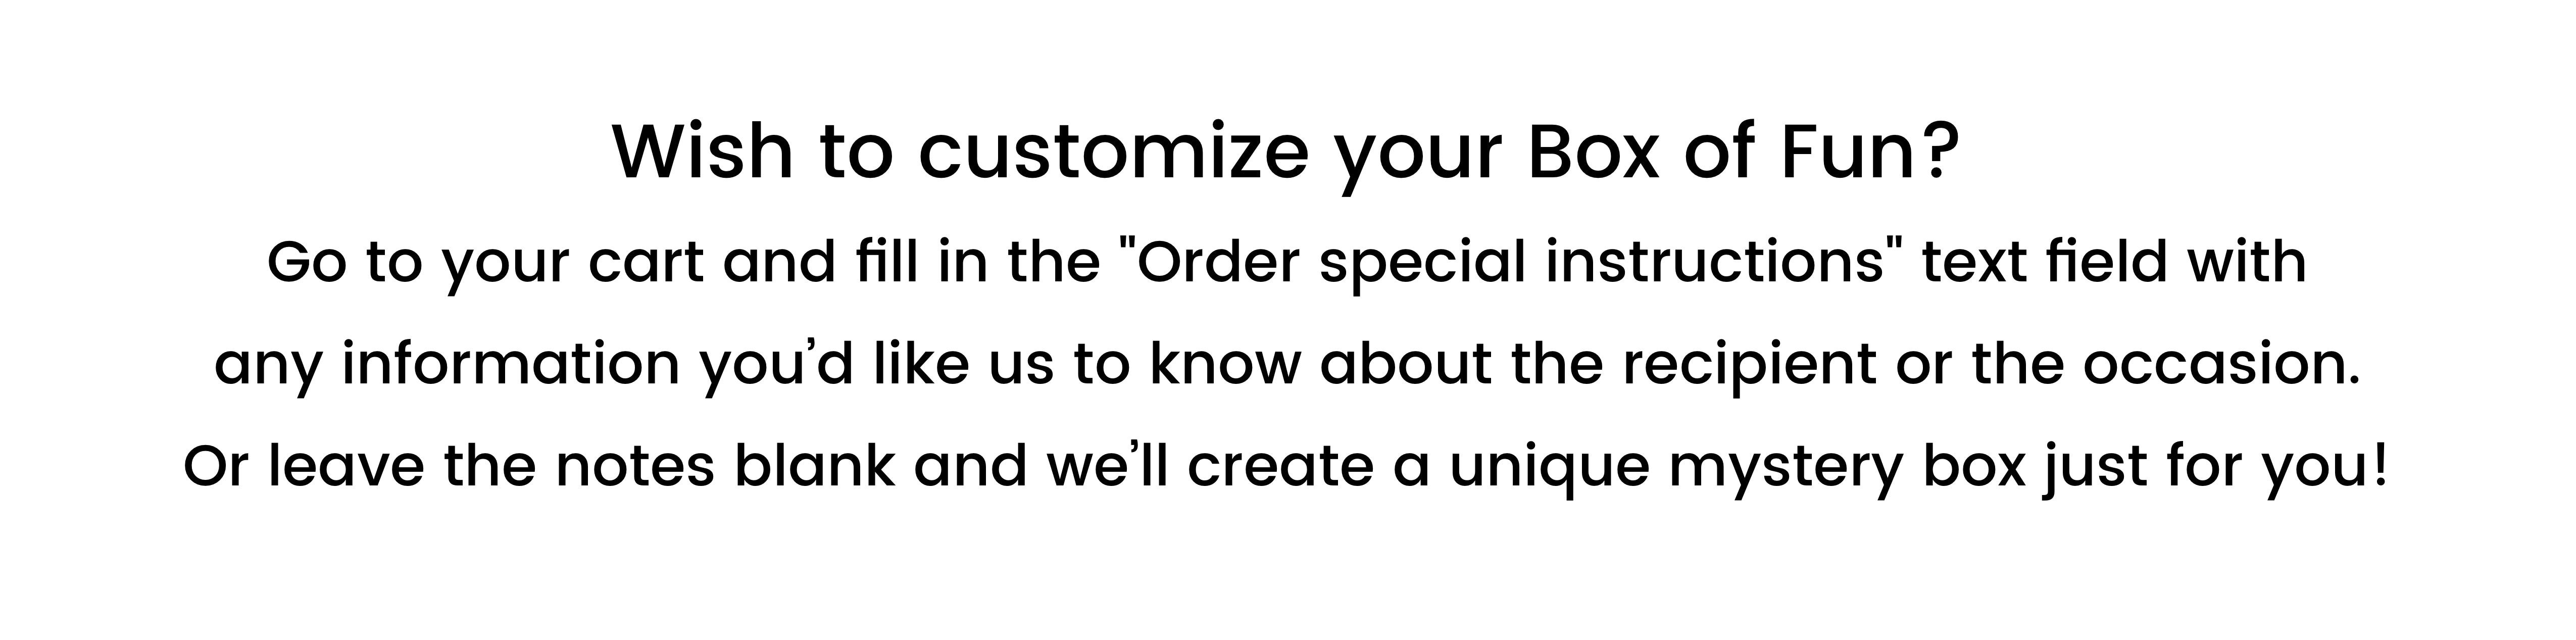 Wish to customize your Box of Fun? Go to your cart and fill in the "Order special instructions" text field with any information you’d like us to know about the recipient or the occasion. Or leave the notes blank and we’ll create a unique mystery box just for you!